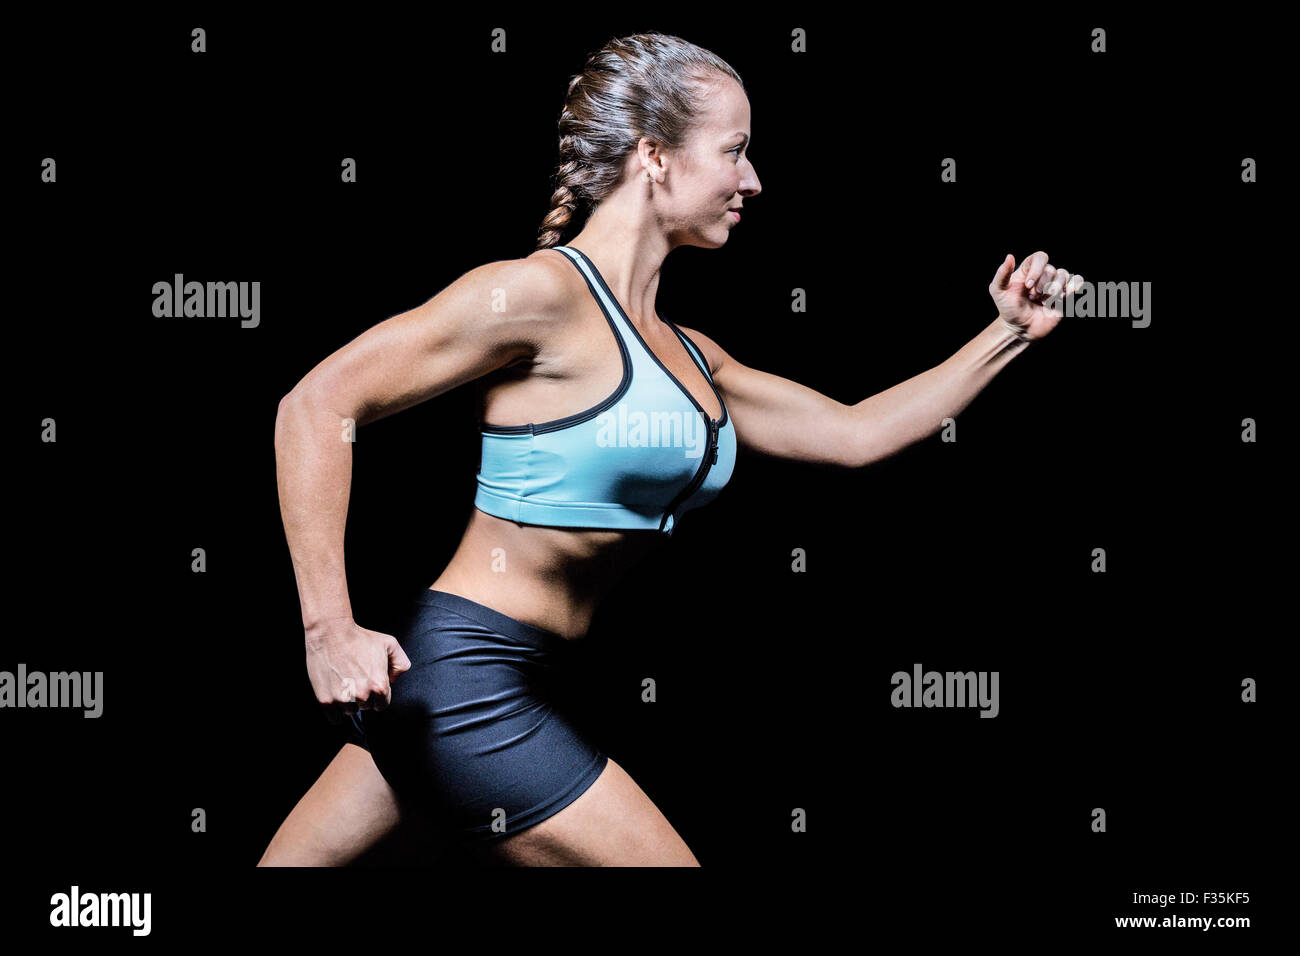 Portrait of a Female Athlete in Fitness Clothes Stock Image - Image of  black, action: 136613685